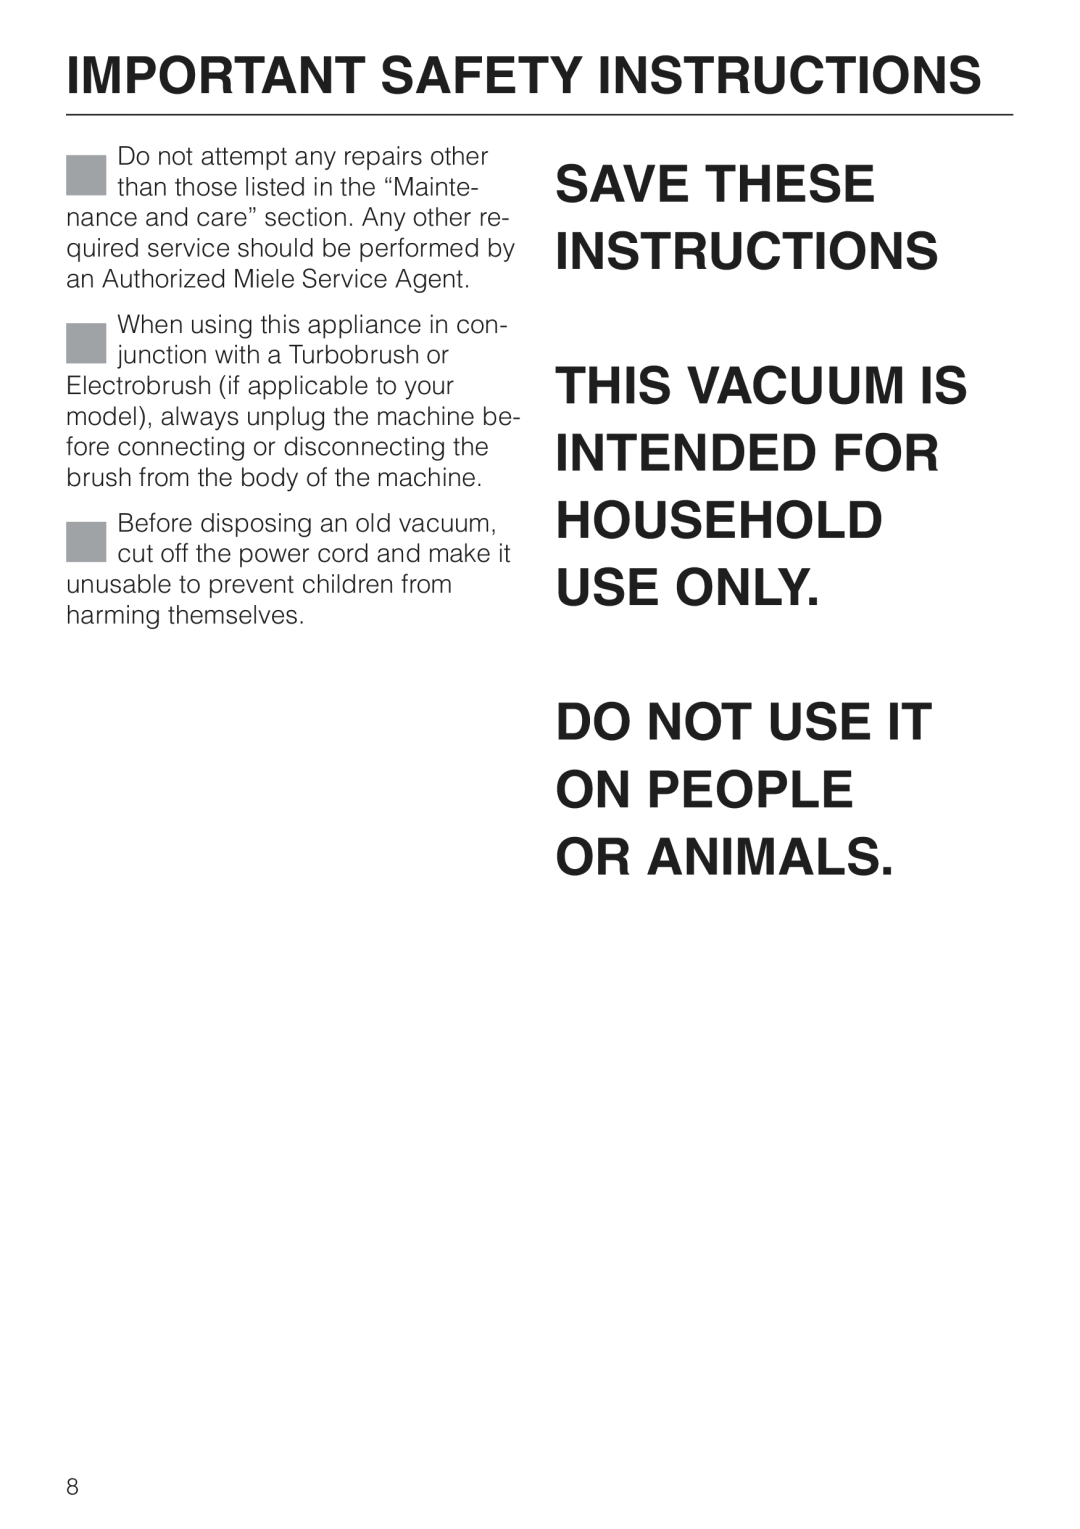 Miele S157 Do Not Use It On People Or Animals, Save These Instructions, This Vacuum Is Intended For Household Use Only 